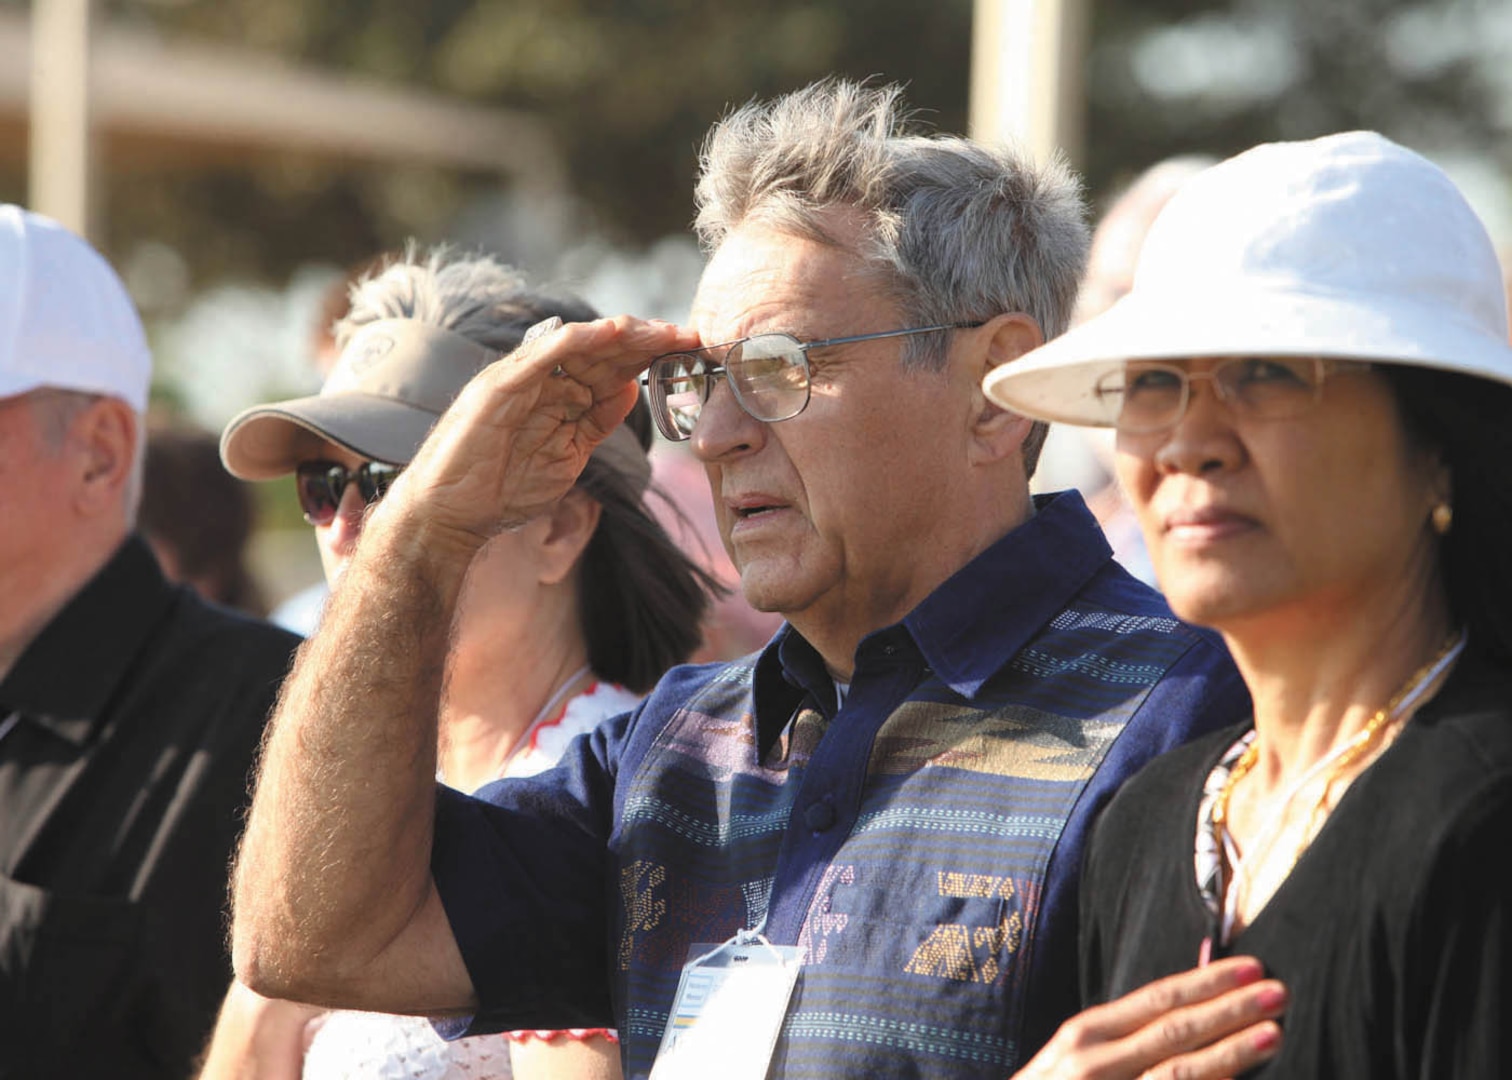 Retired Capt. Art Cormier, a former Vietnam prisoner of war, and his wife, Khamnang, render courtesies during playing of the National Anthem Sept. 23 at the Air Force Basic Military Training graduation. (U.S. Air Force photo/Robbin Cresswell)